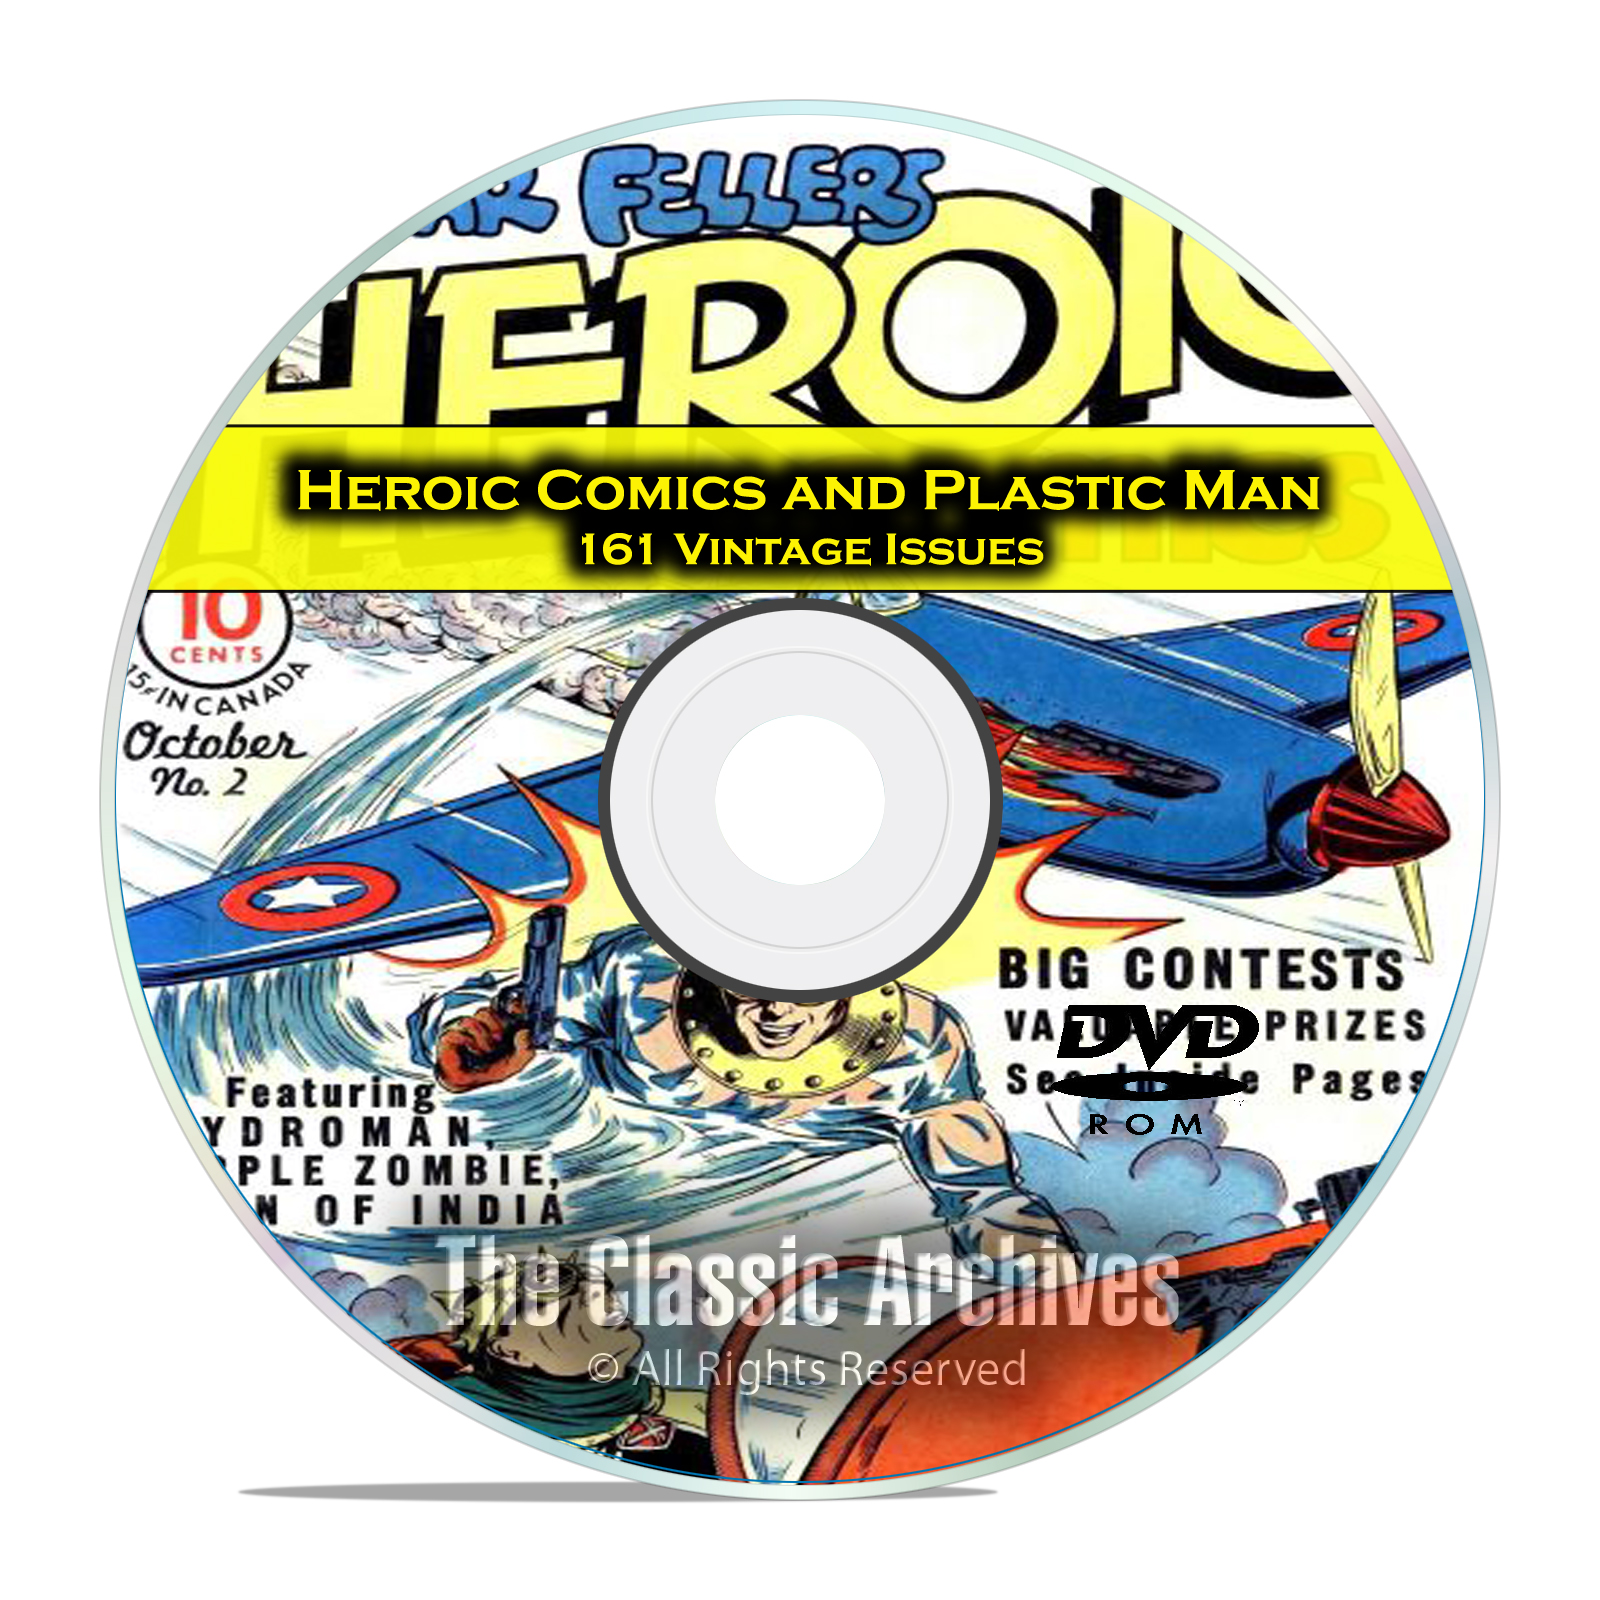 Heroic Comics and Plastic Man 161 Vintage Issues, Golden Age Comics PDF DVD - Click Image to Close